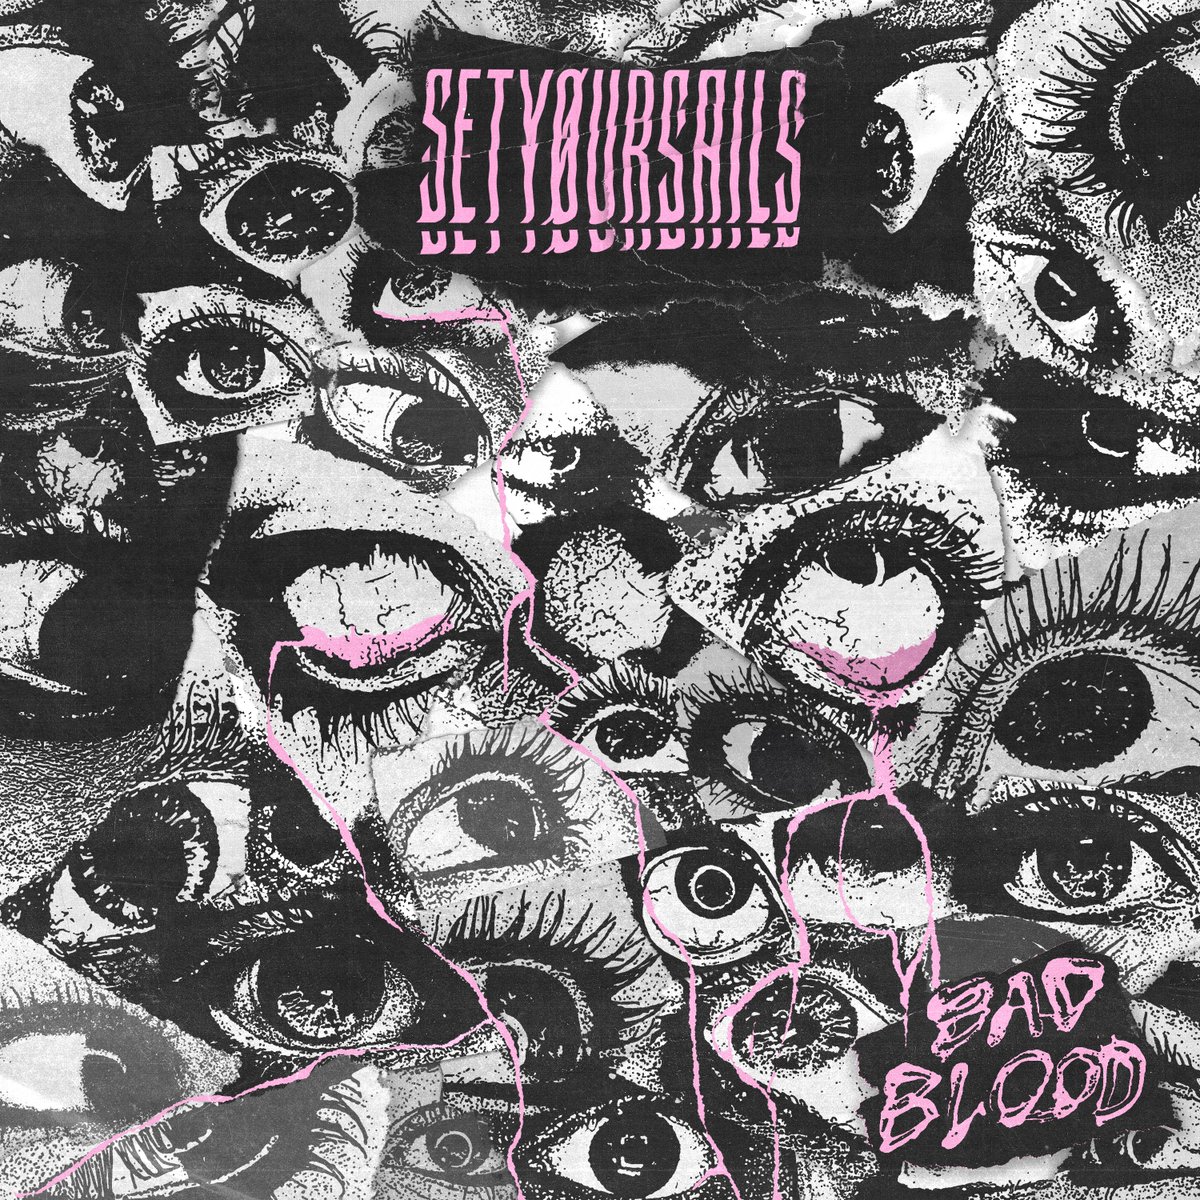 Happy Releaseday, SETYØURSAILS! 🤘🎶
Bad Blood is out today!
⚫ lnk.to/SYS-BadBlood